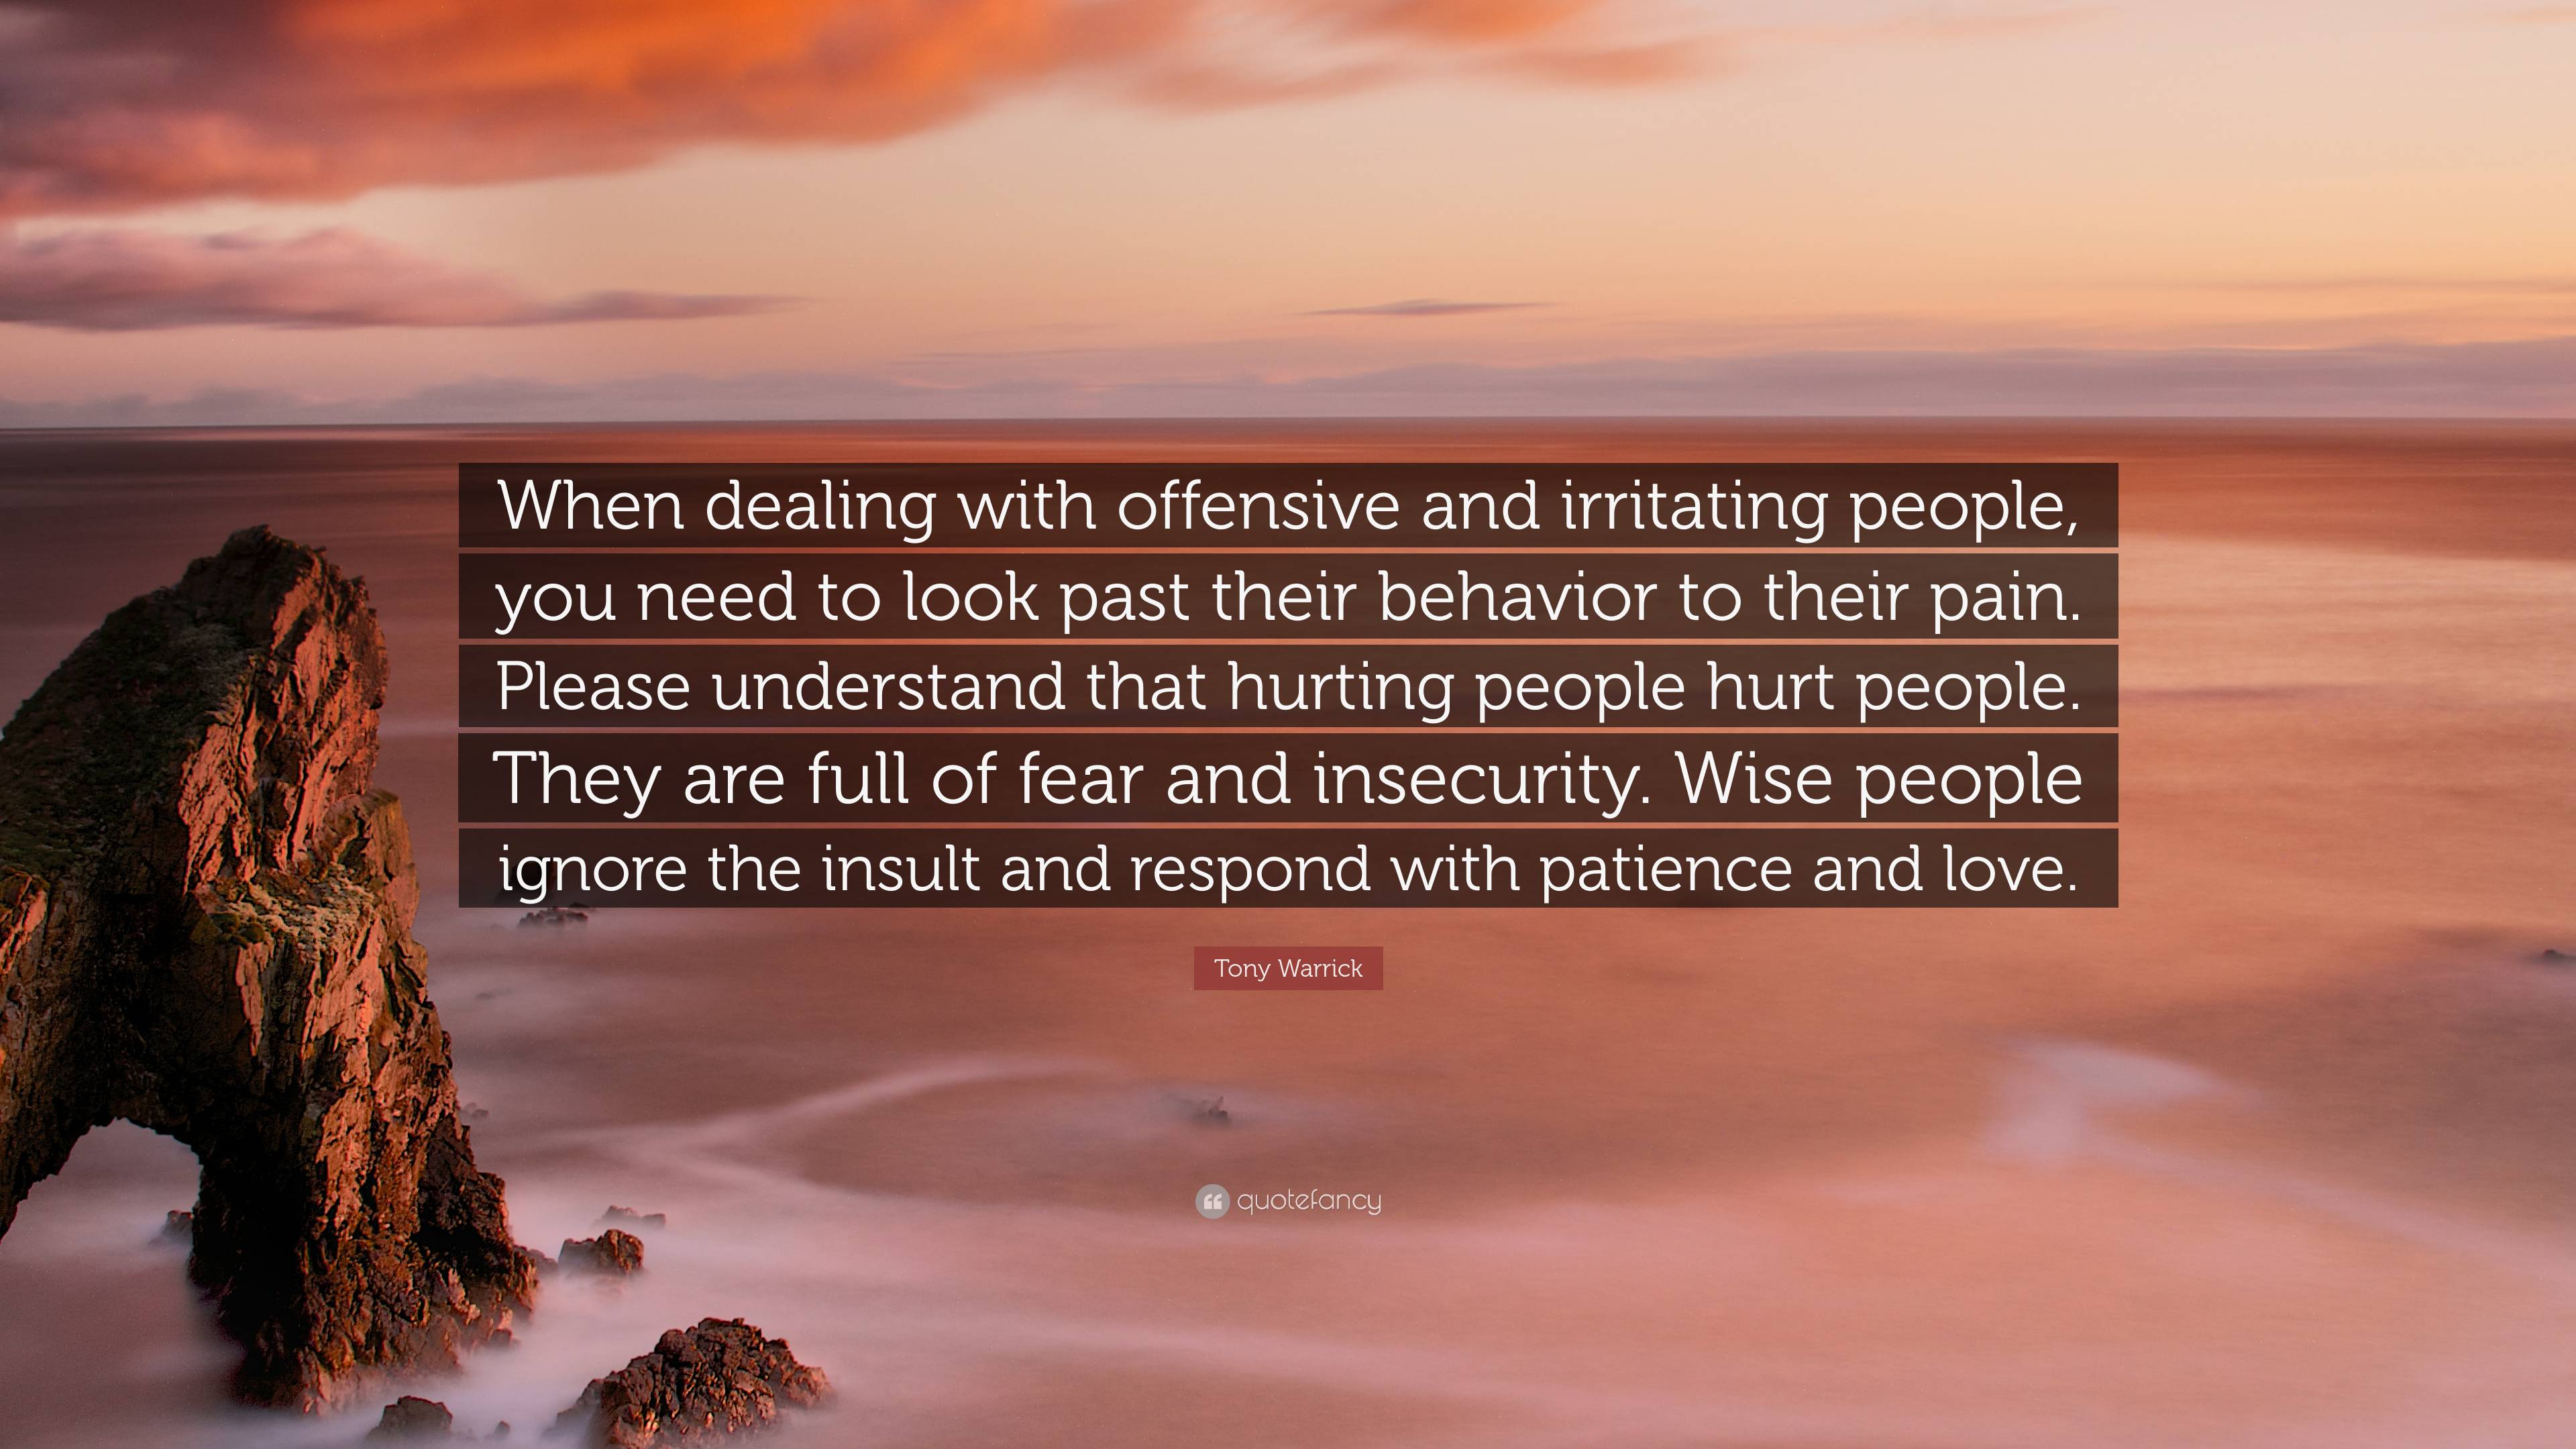 Tony Warrick Quote: “When dealing with offensive and irritating people ...